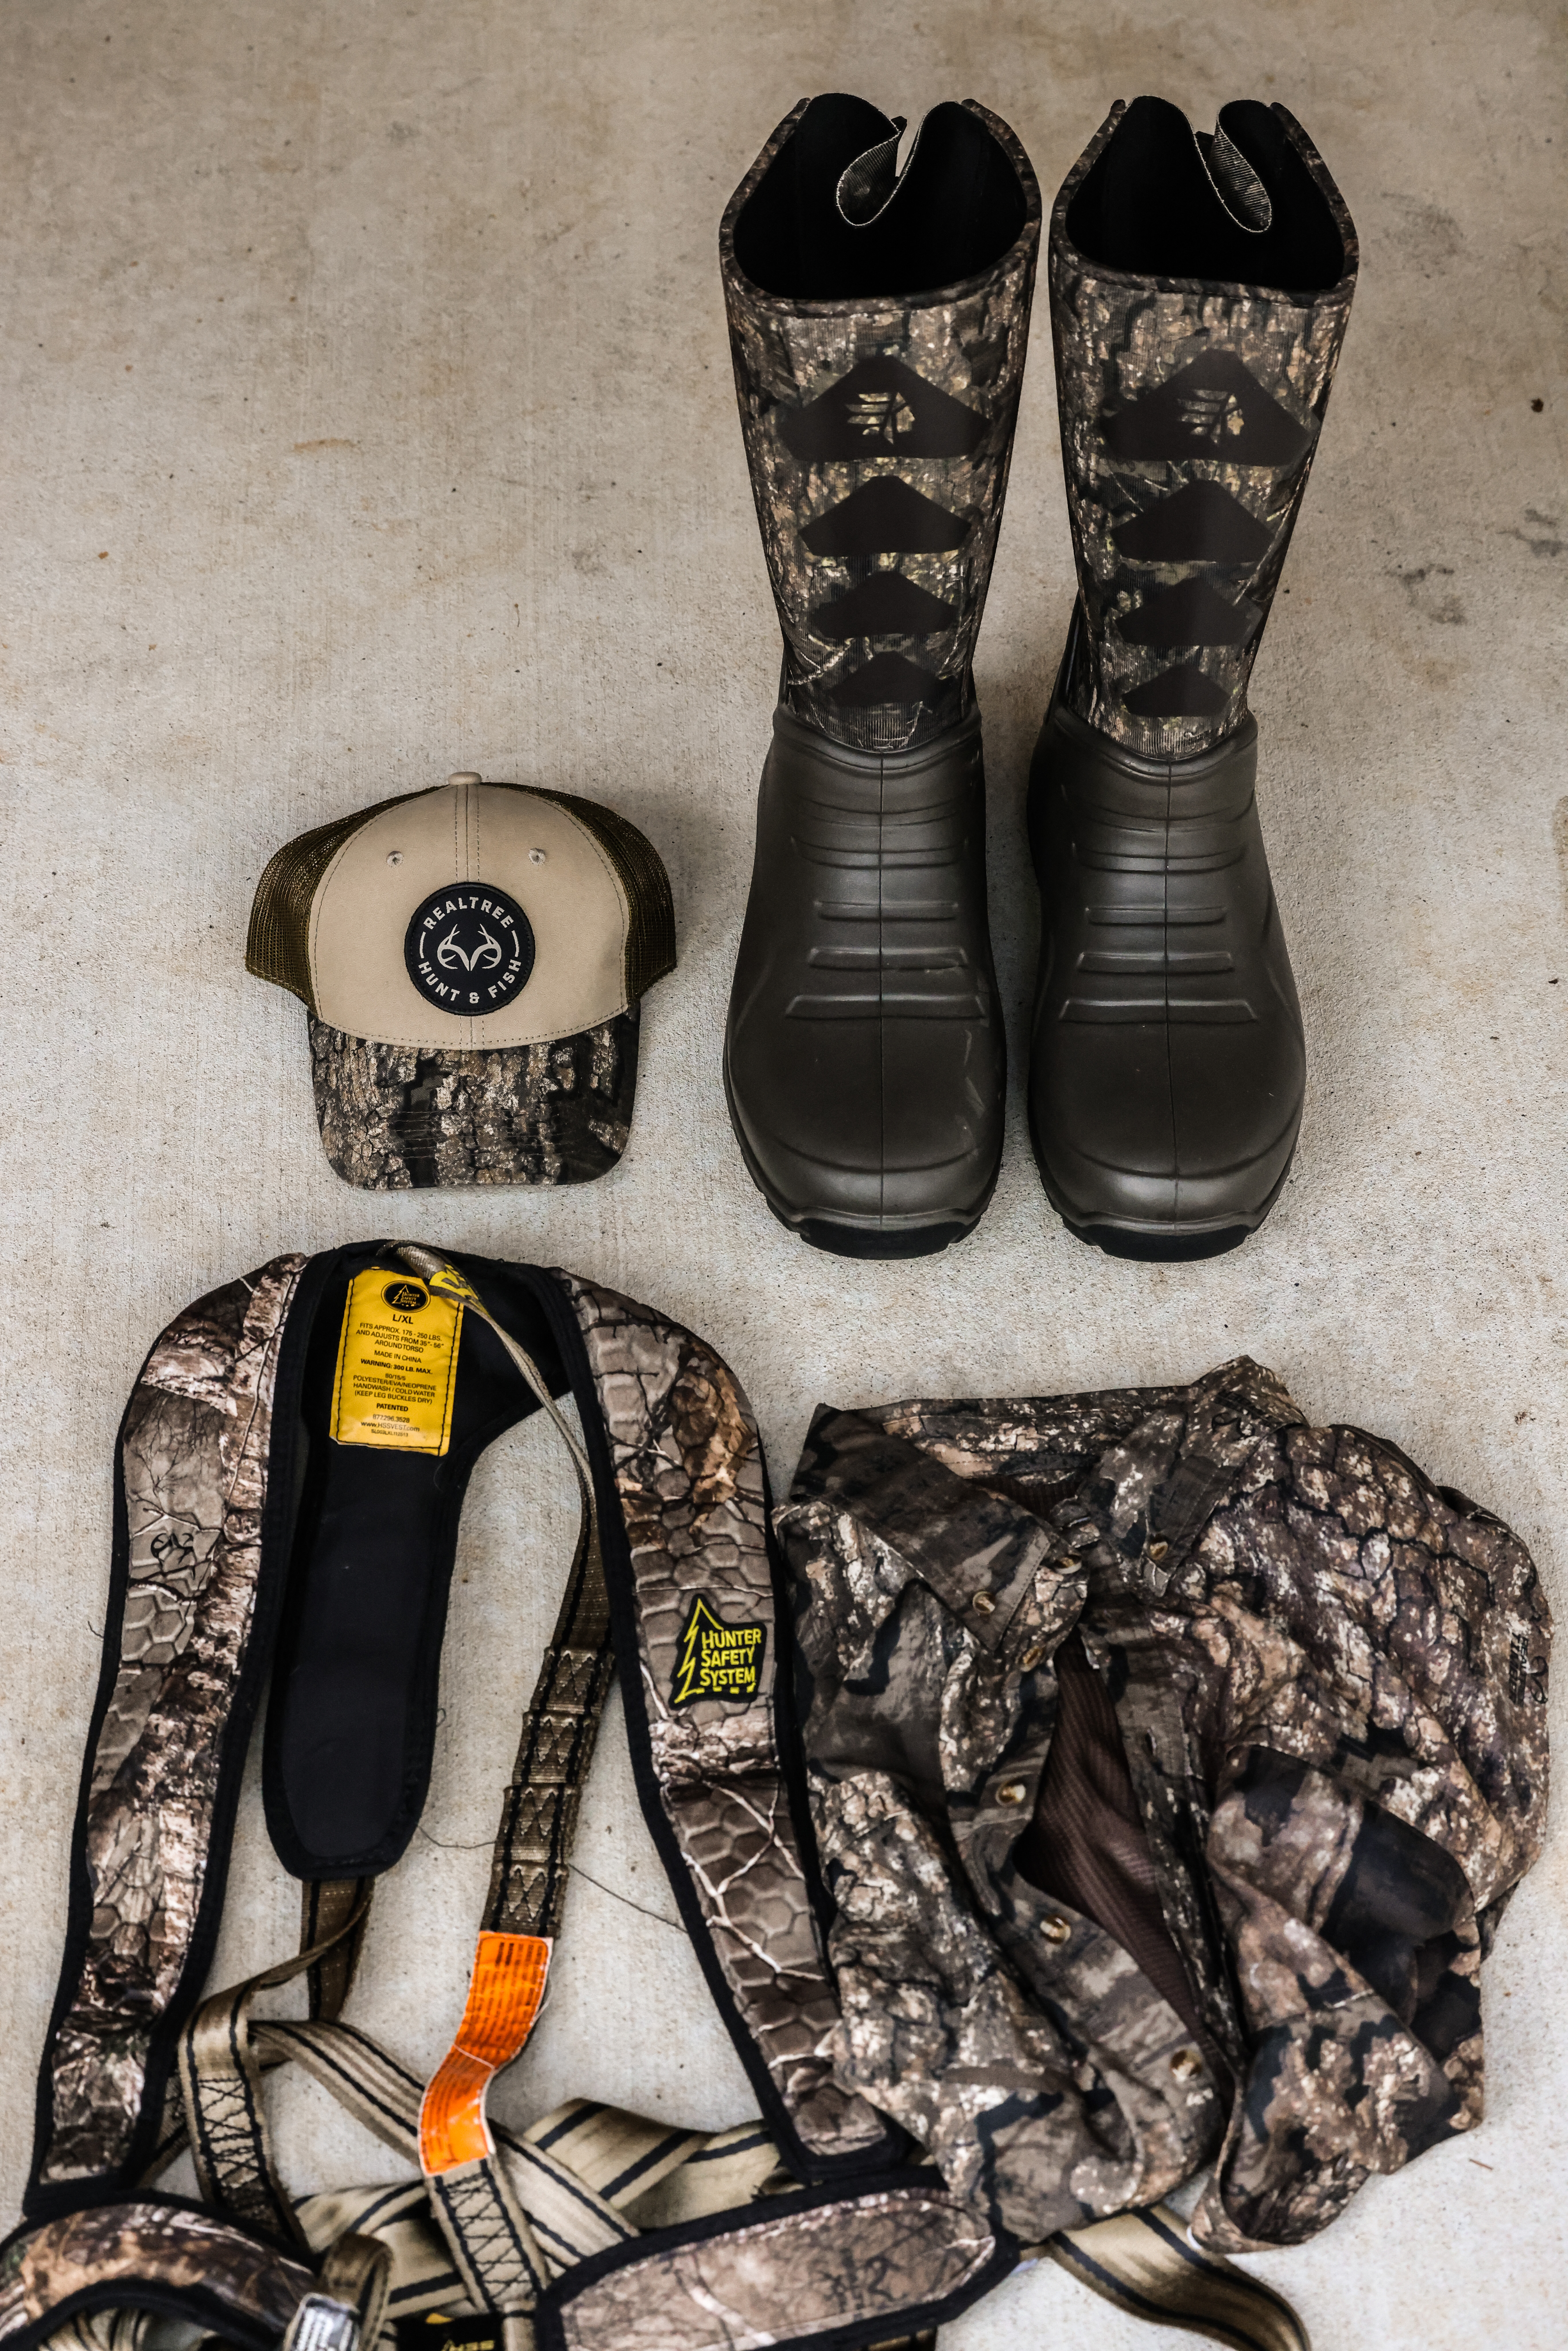 Top 5 Hunting Apparel Brands for the Upcoming Season